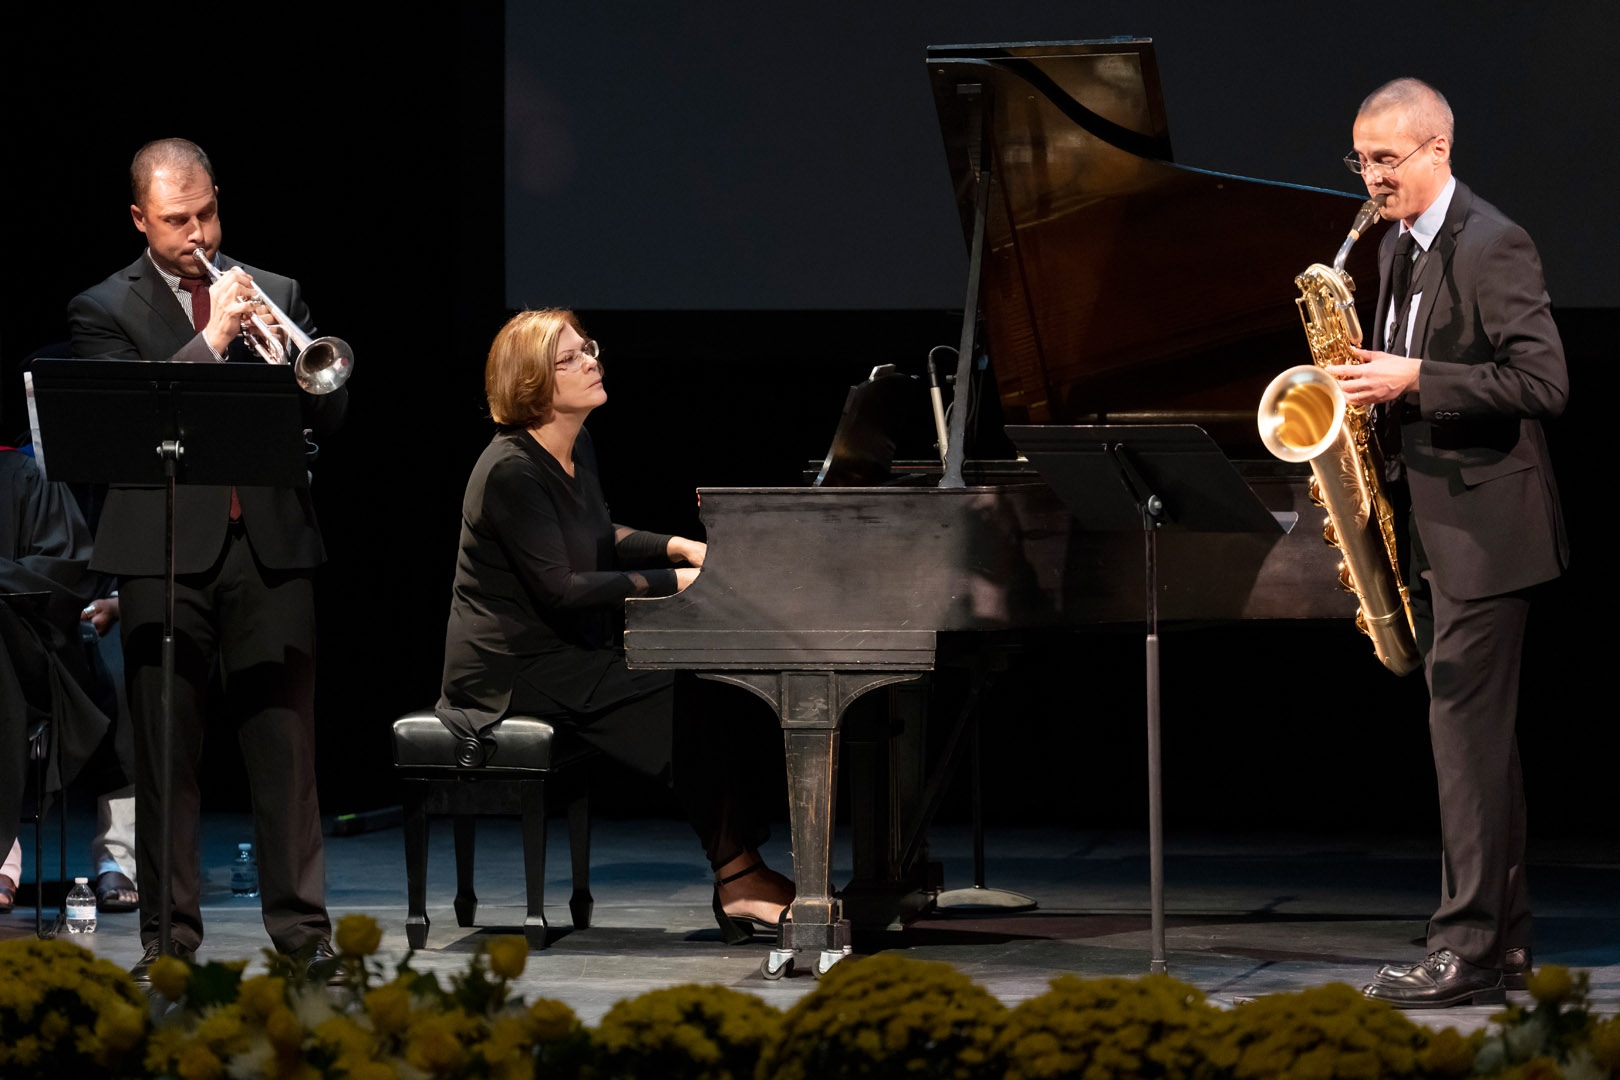 Inaugural Fanfare, "Jubilation" by Ofer Ben-Amots and performed by (left to right)  Benjamin Paille, Susan Grace, and Ricky Sweum, during the Inauguration of L. Song Richardson, the 14th President of Colorado College on Monday, 8/29/22. <span class="cc-gallery-credit">[Photo by Lonnie Timmons III]</span>